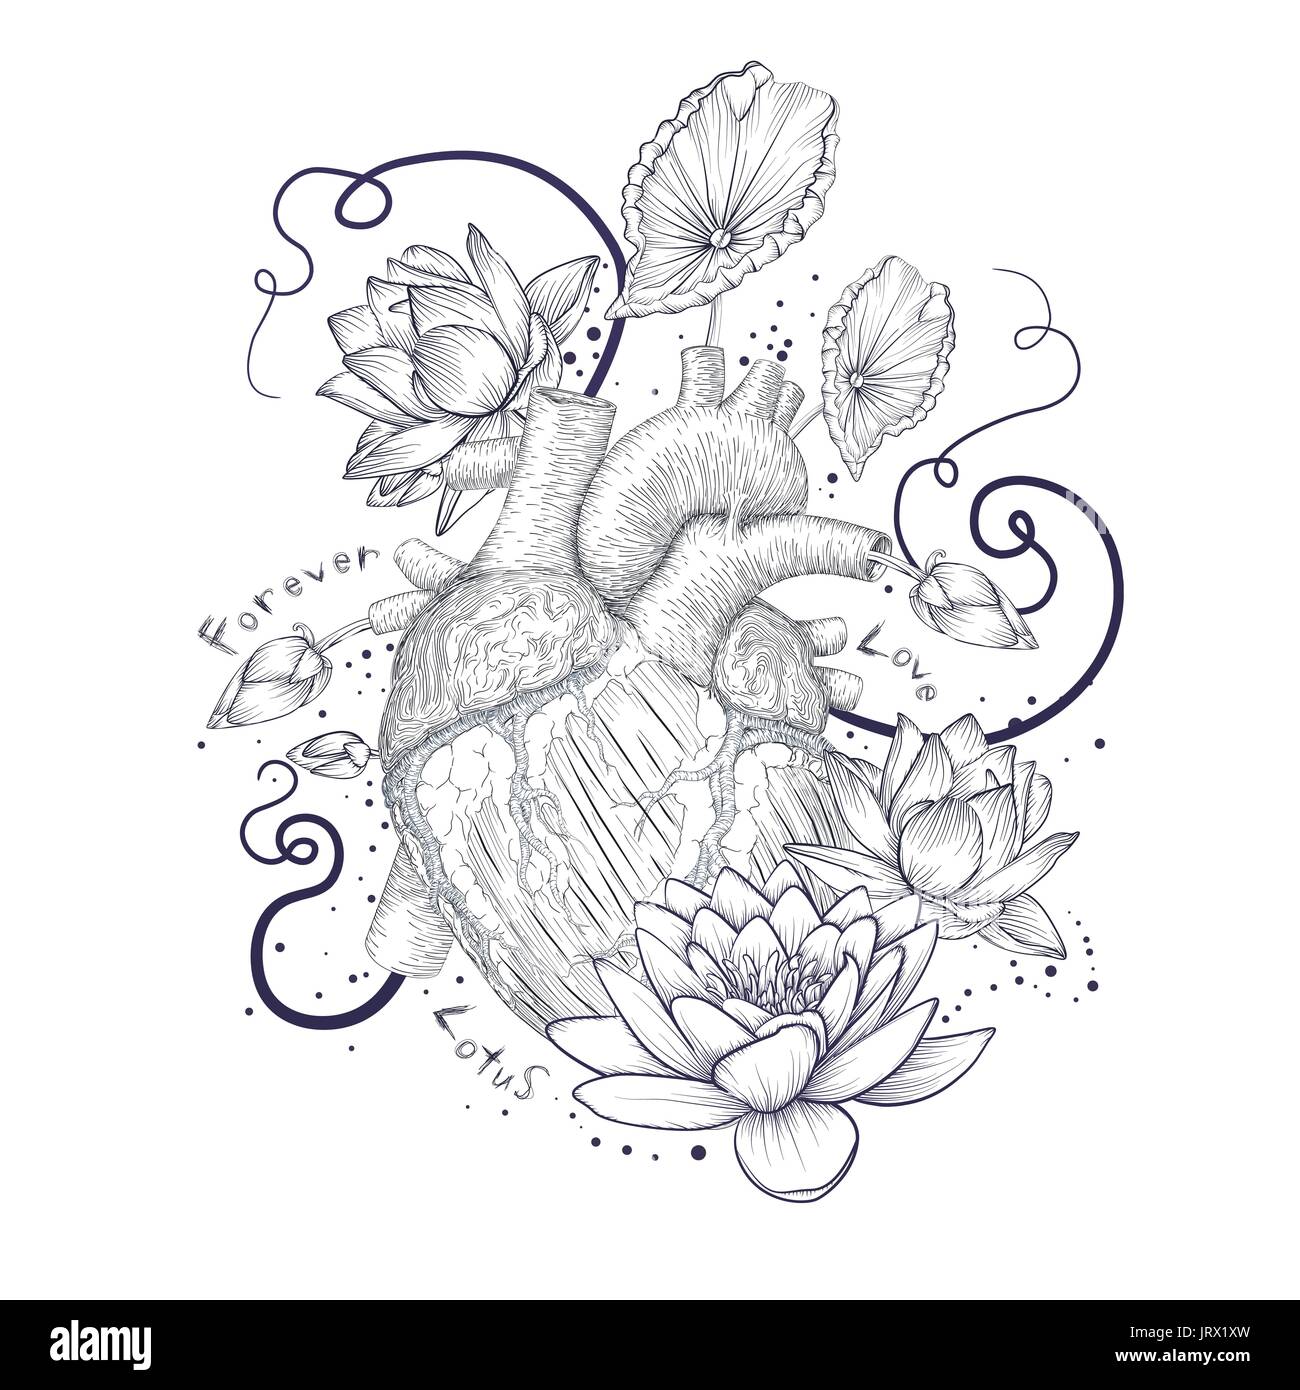 Human flora heart hipster tattoo love wild heart Symbol  Lotus waterlily lily flower leaves decorative stripes dots. Fantasy art t-shirt design Vector Stock Vector